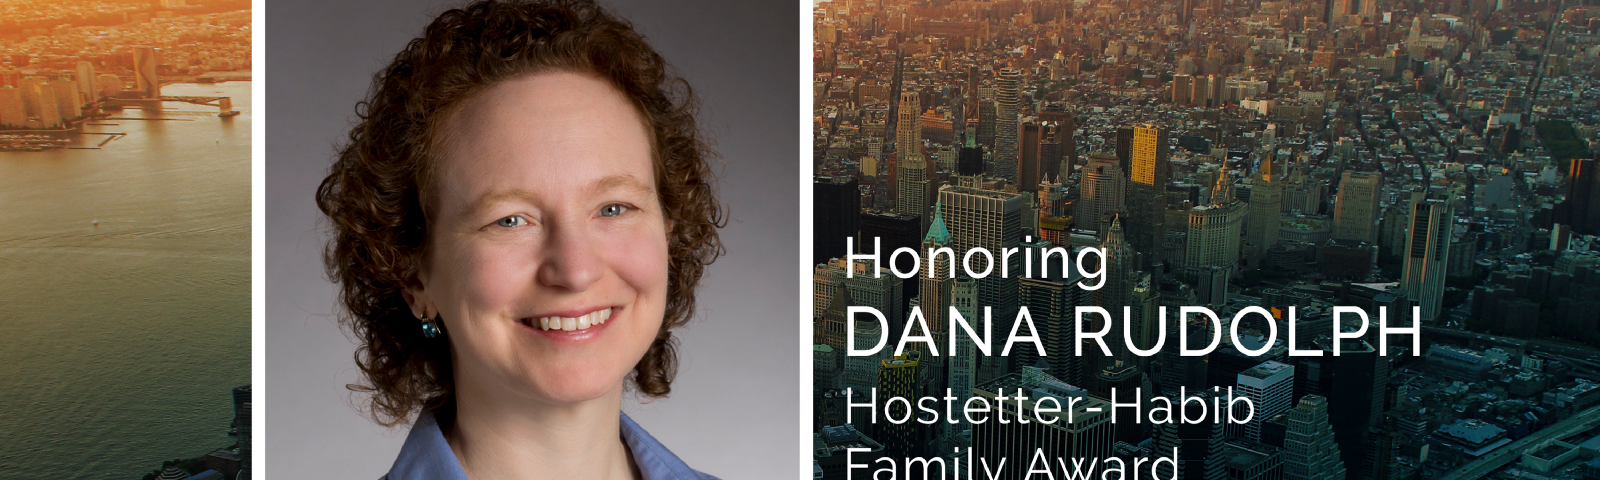 INTERVIEW: Dana Rudolph on Writing for LGBTQ Parents, Receiving Award from Family Equality Council